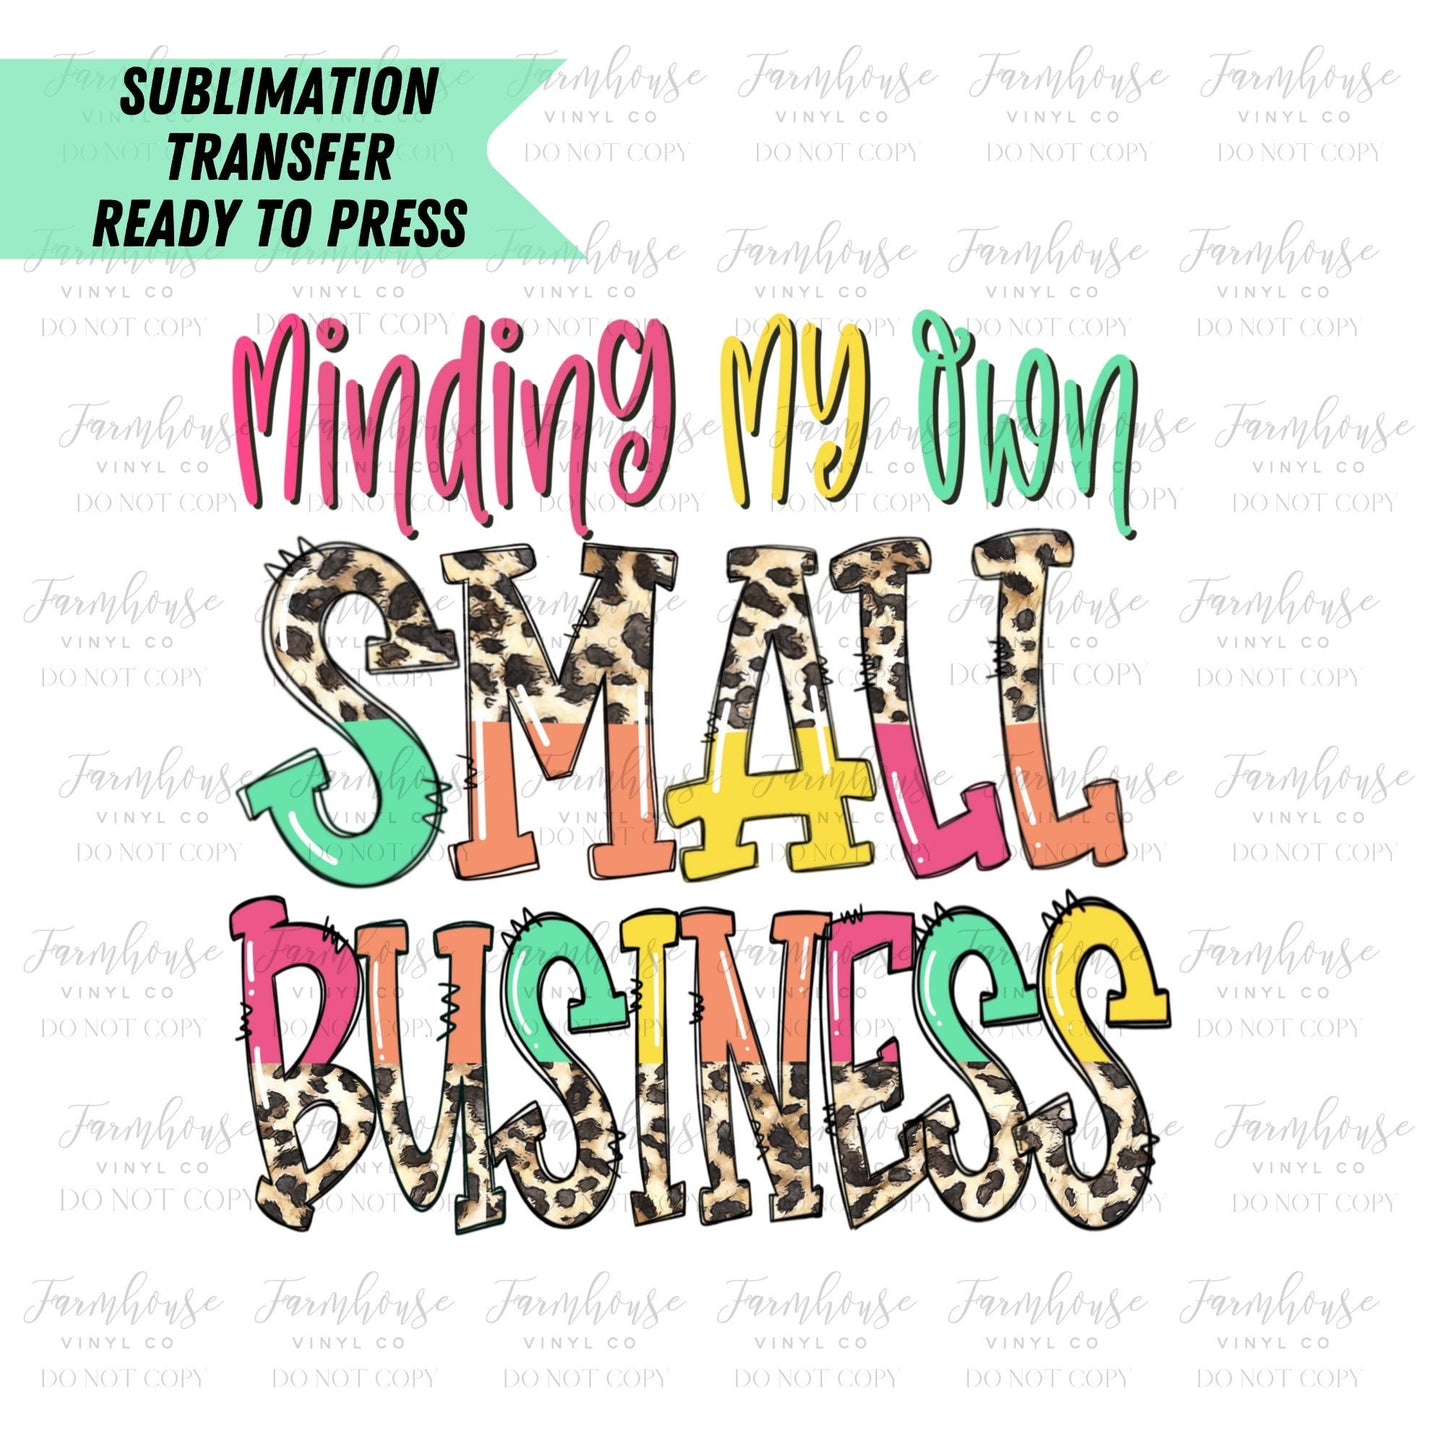 Minding My Own Small Business Ready to Press Sublimation Transfer - Farmhouse Vinyl Co